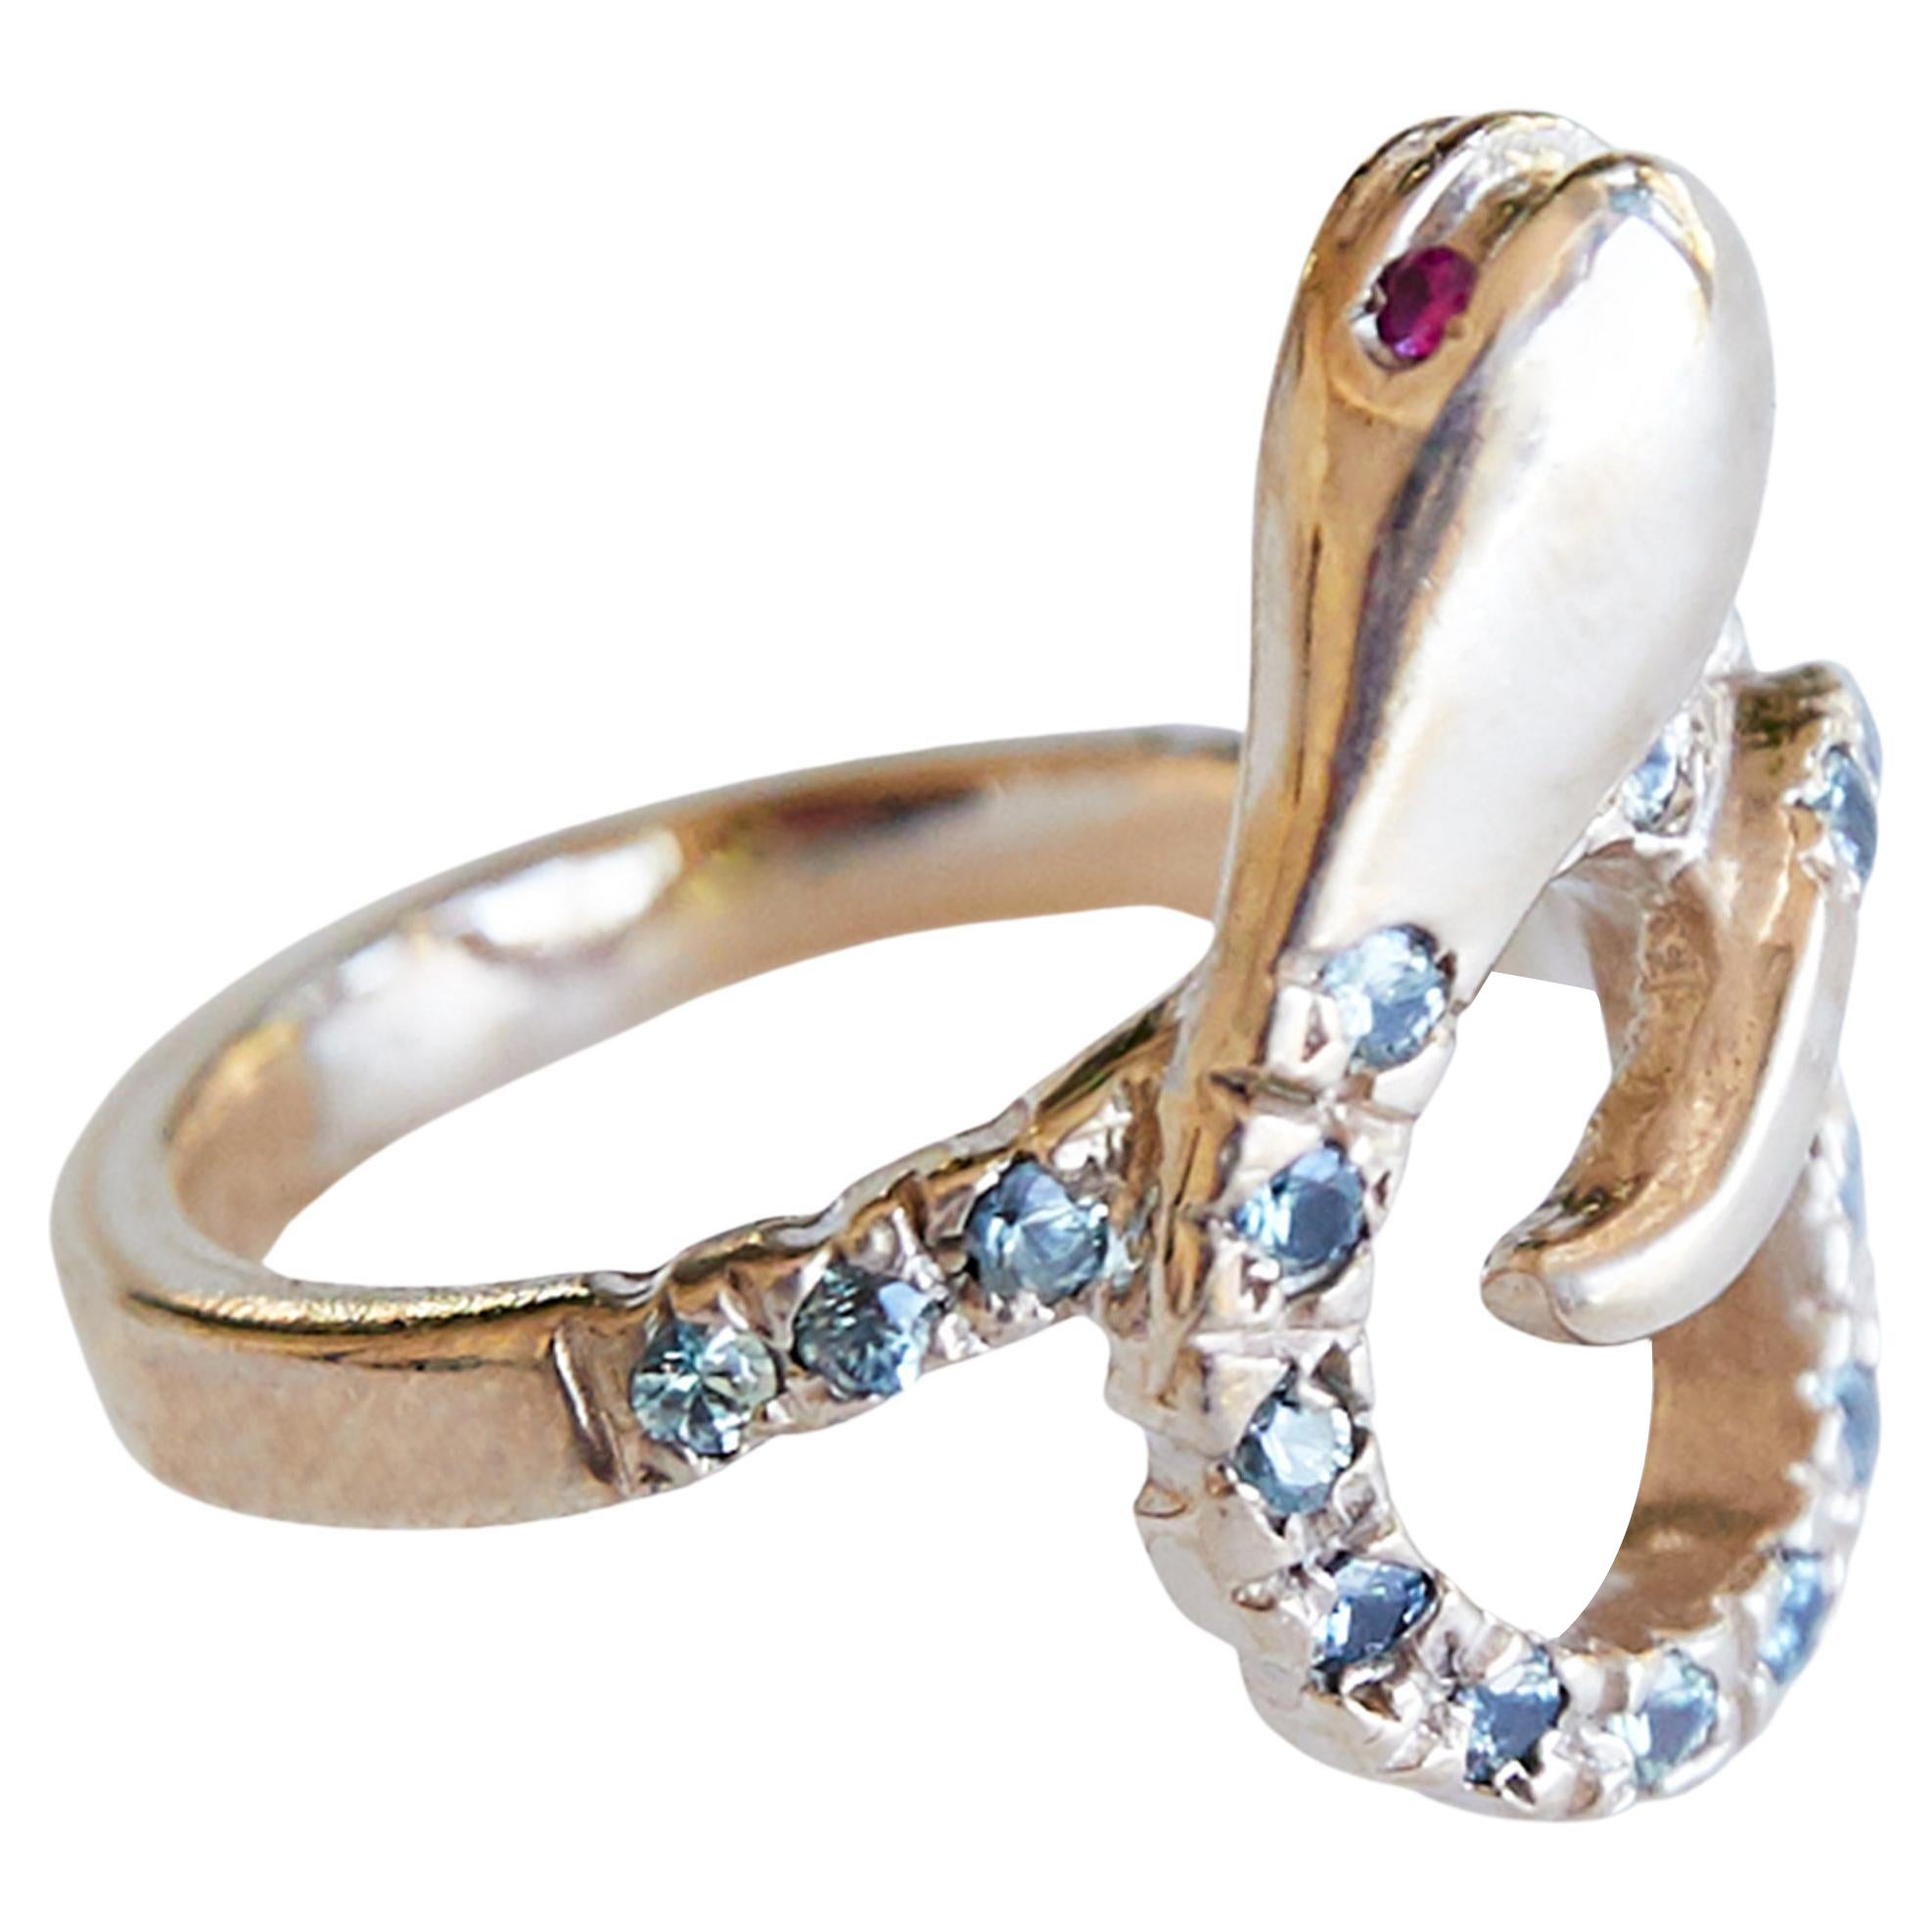 Gold Snake Ring Cocktail Ring Sapphire Ruby Animal jewelry J Dauphin For Sale